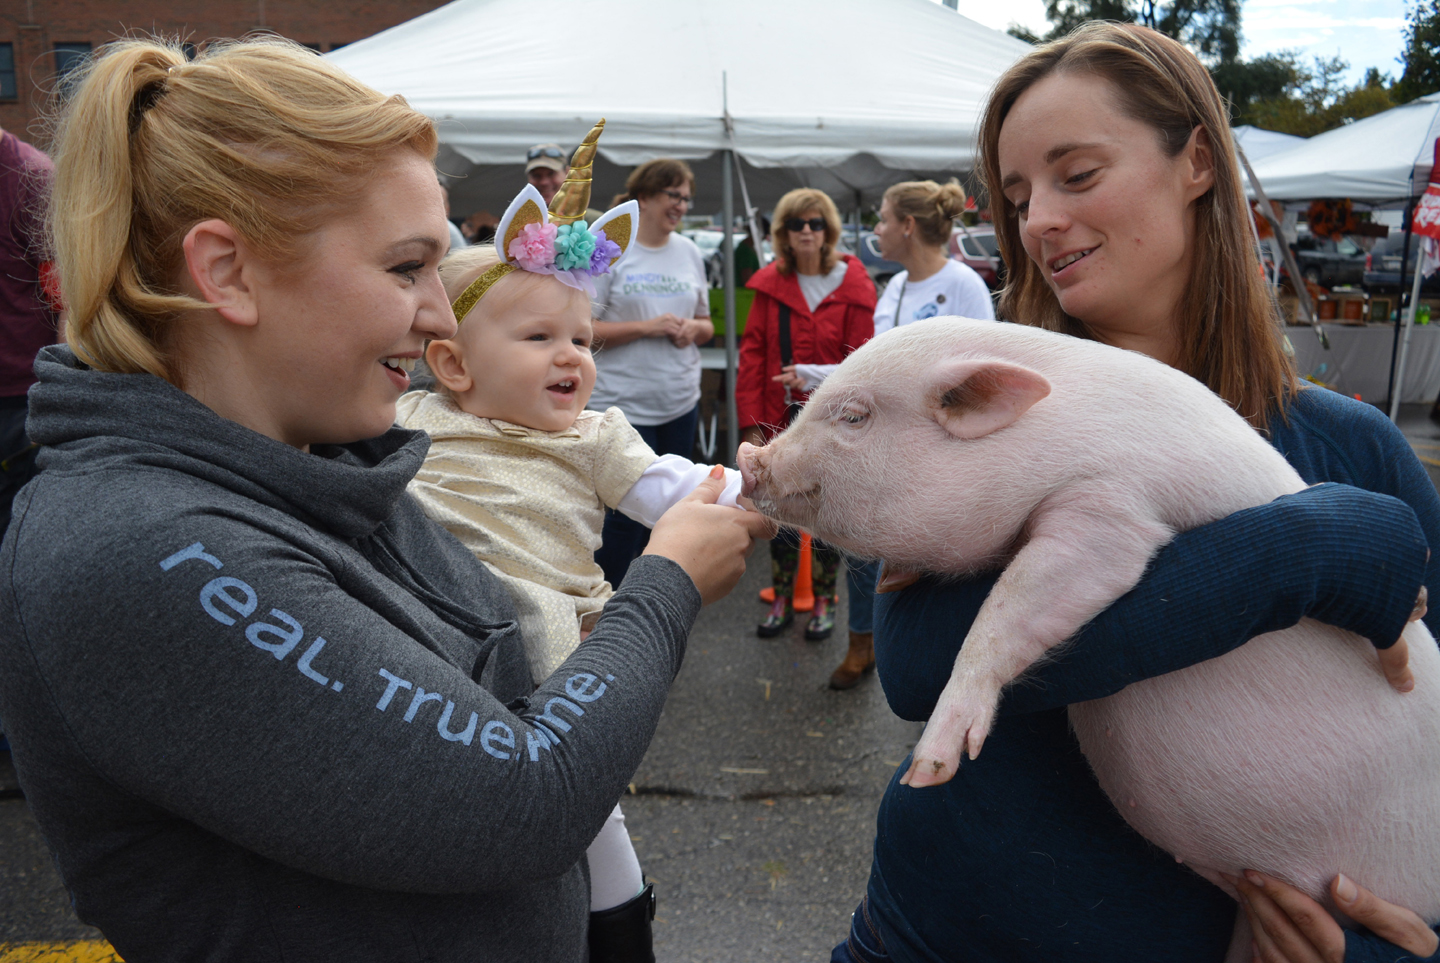 Oxford resident Meagan Brandt (left) and her daughter Brynna, 1, meet Bubbles the Pig, who won the pet costume contest by dressing as a “streaker.” Bubbles’ owner is Jessica Filiatrault (right), owner of Matador Farm in Oxford. Photo by C.J. Carnacchio.